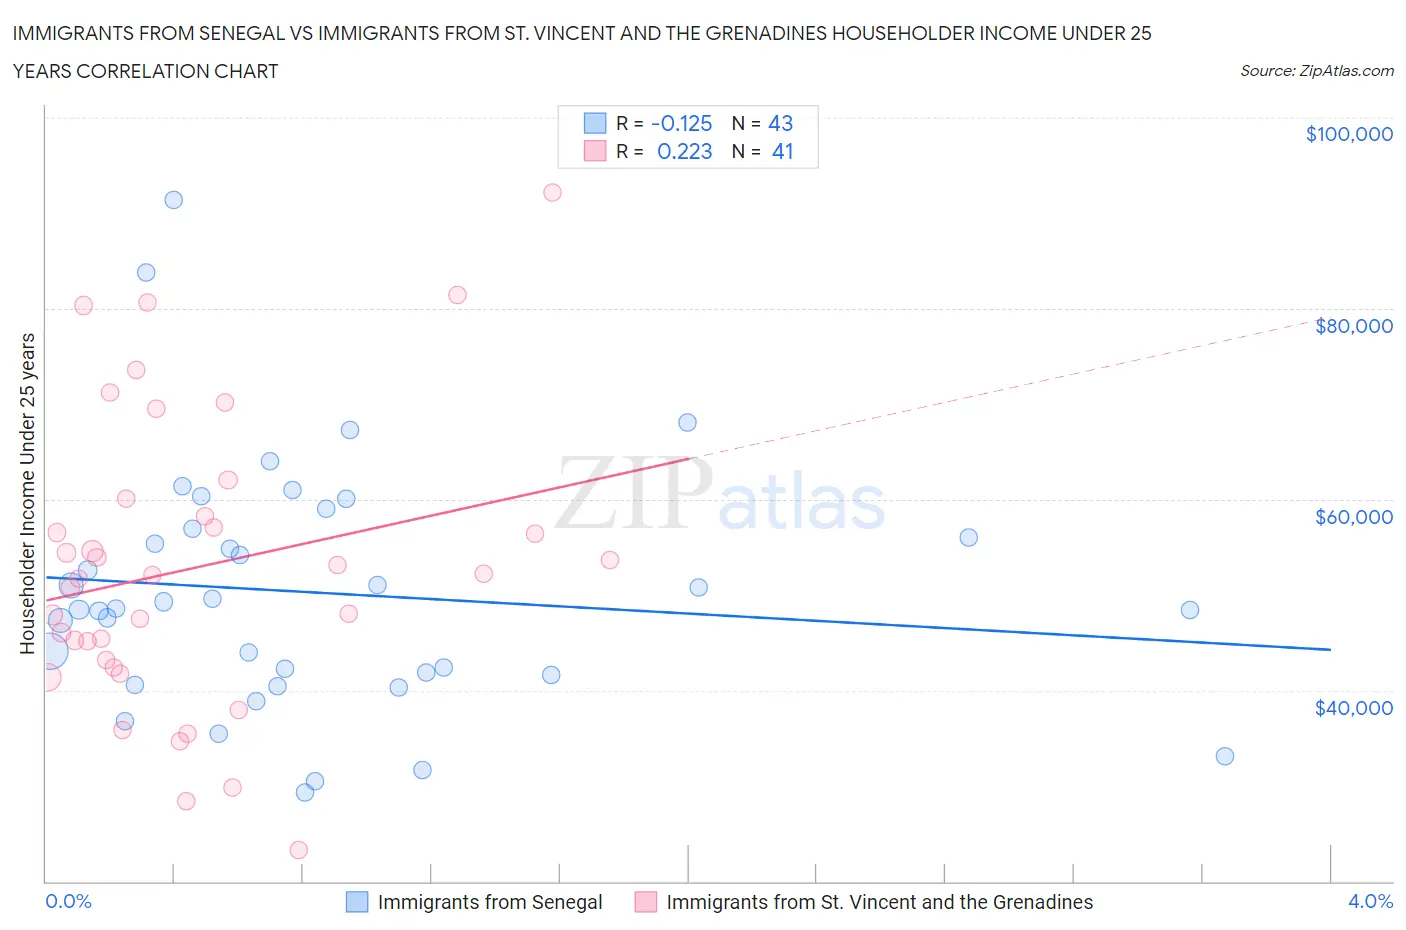 Immigrants from Senegal vs Immigrants from St. Vincent and the Grenadines Householder Income Under 25 years